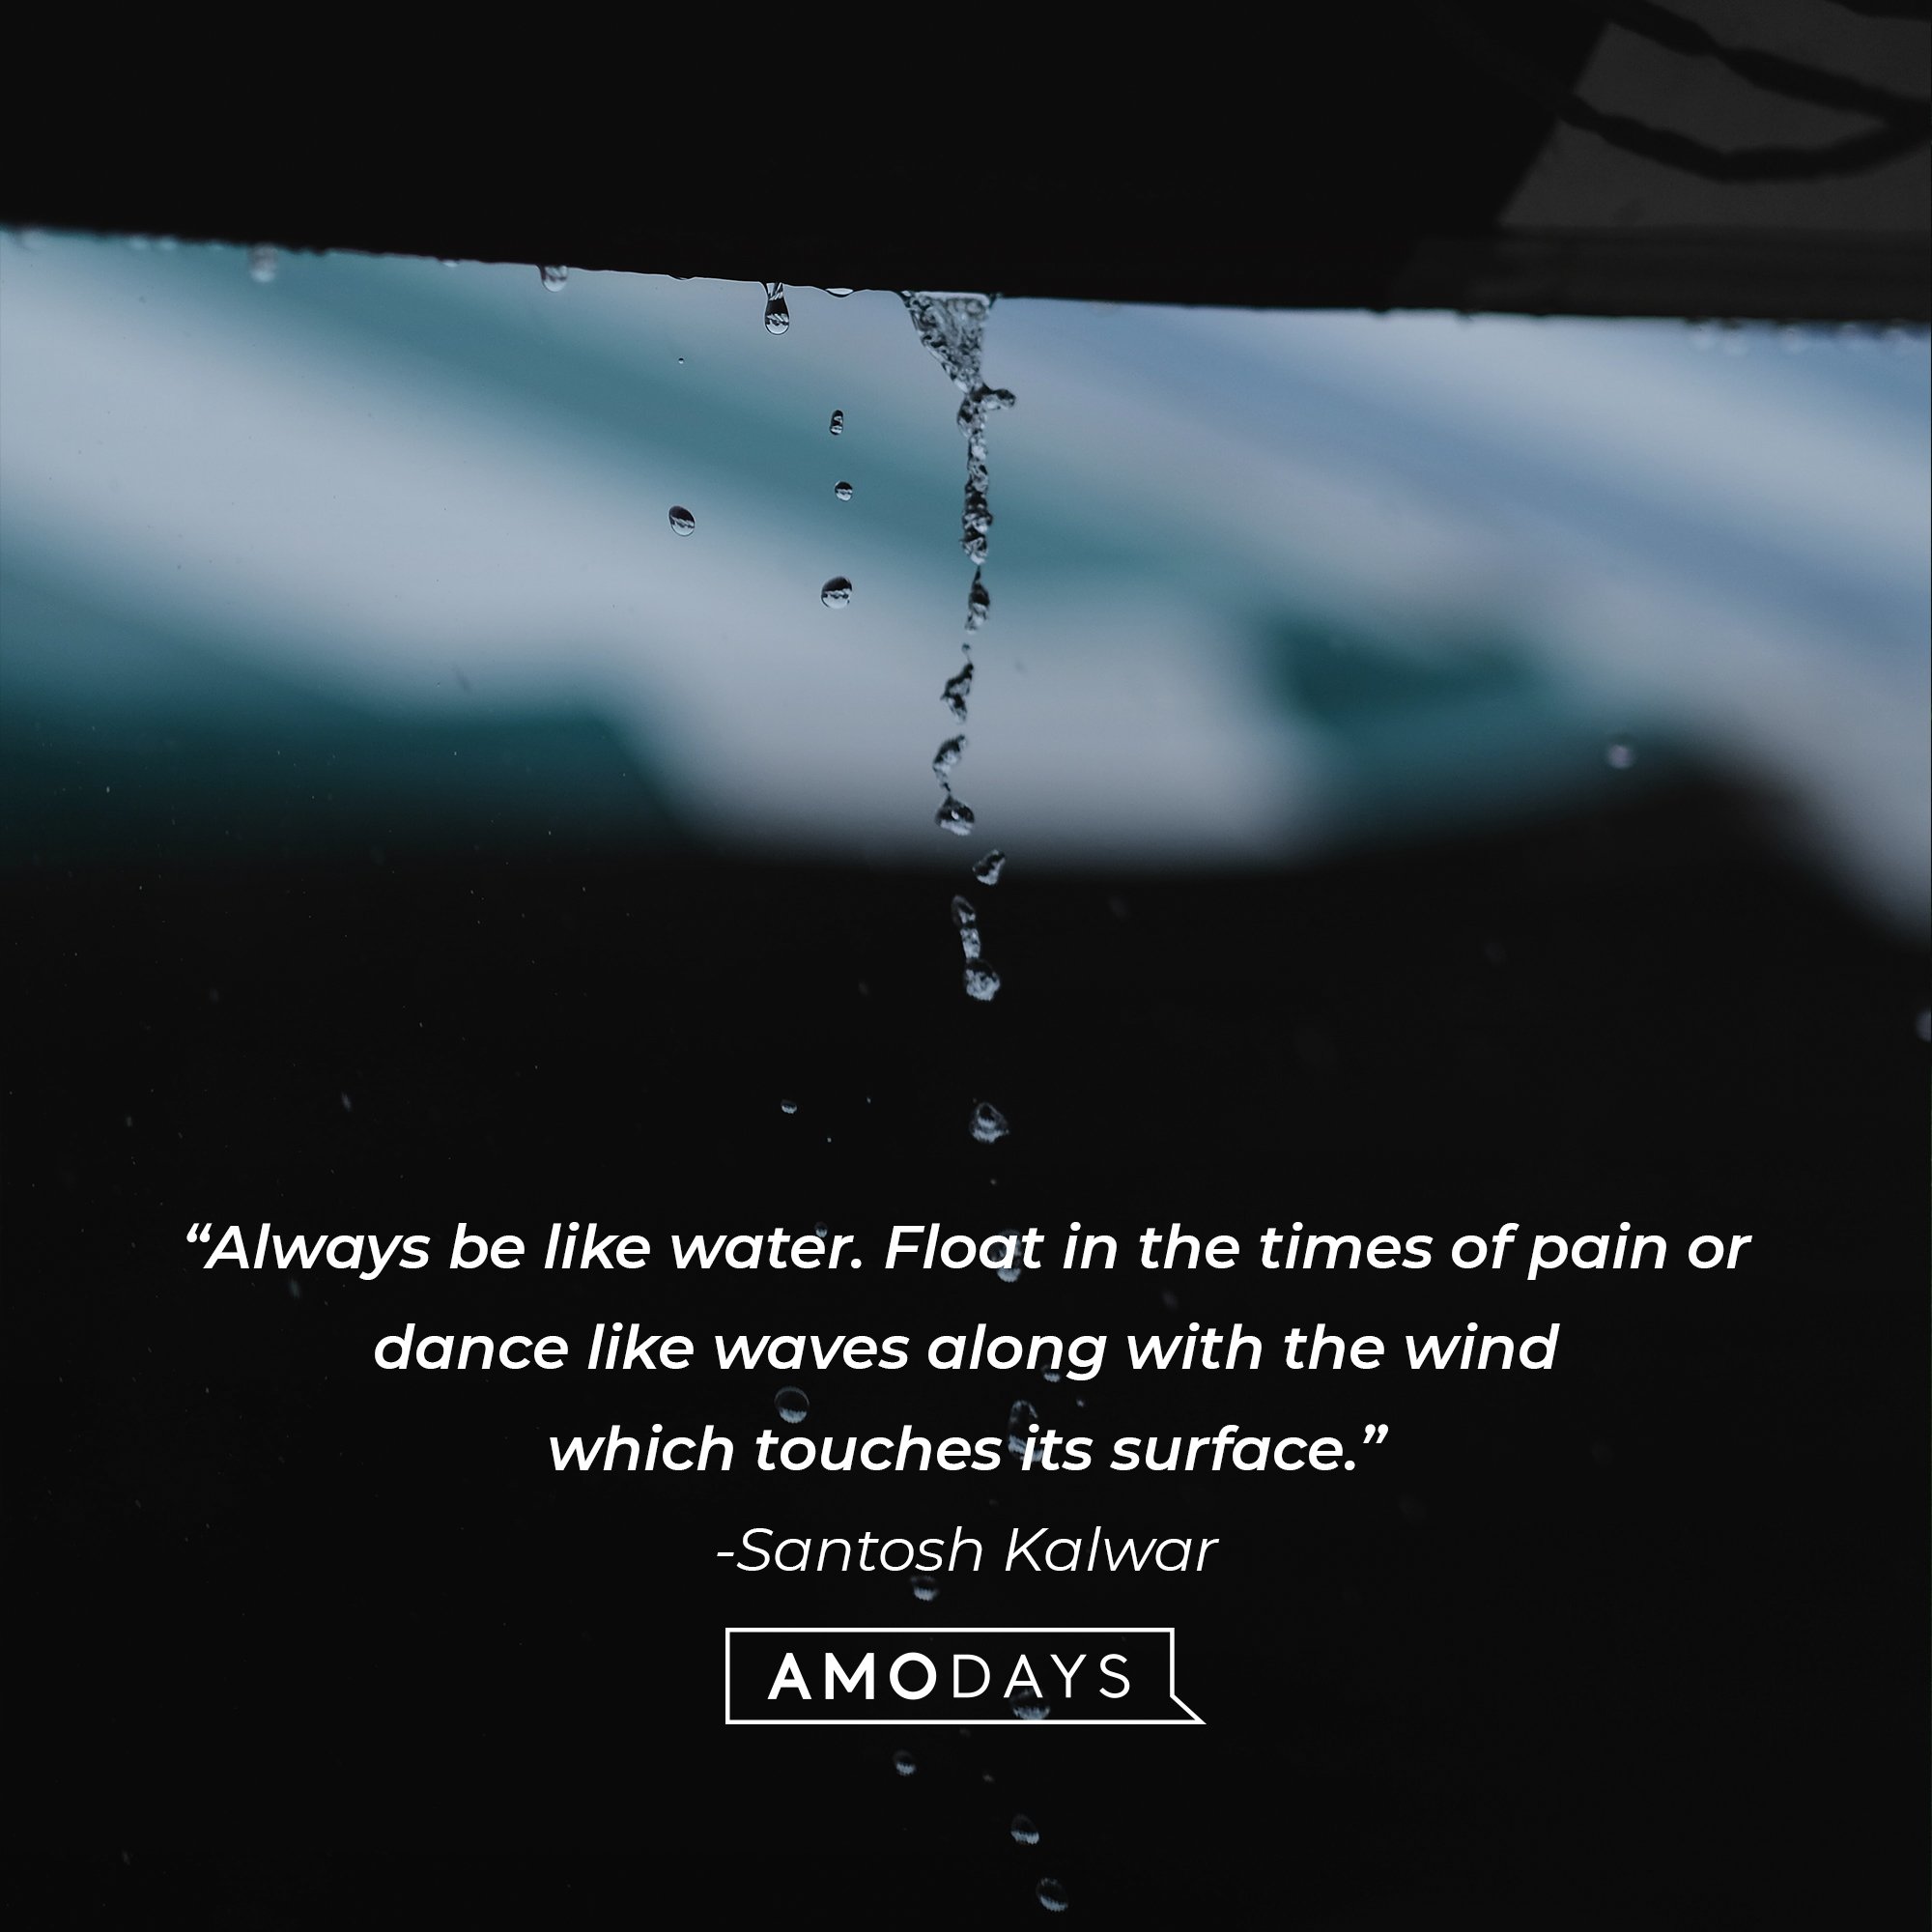 Santosh Kalwar’s quote: “Always be like water. Float in the times of pain or dance like waves along with the wind which touches its surface.” | Image: AmoDays